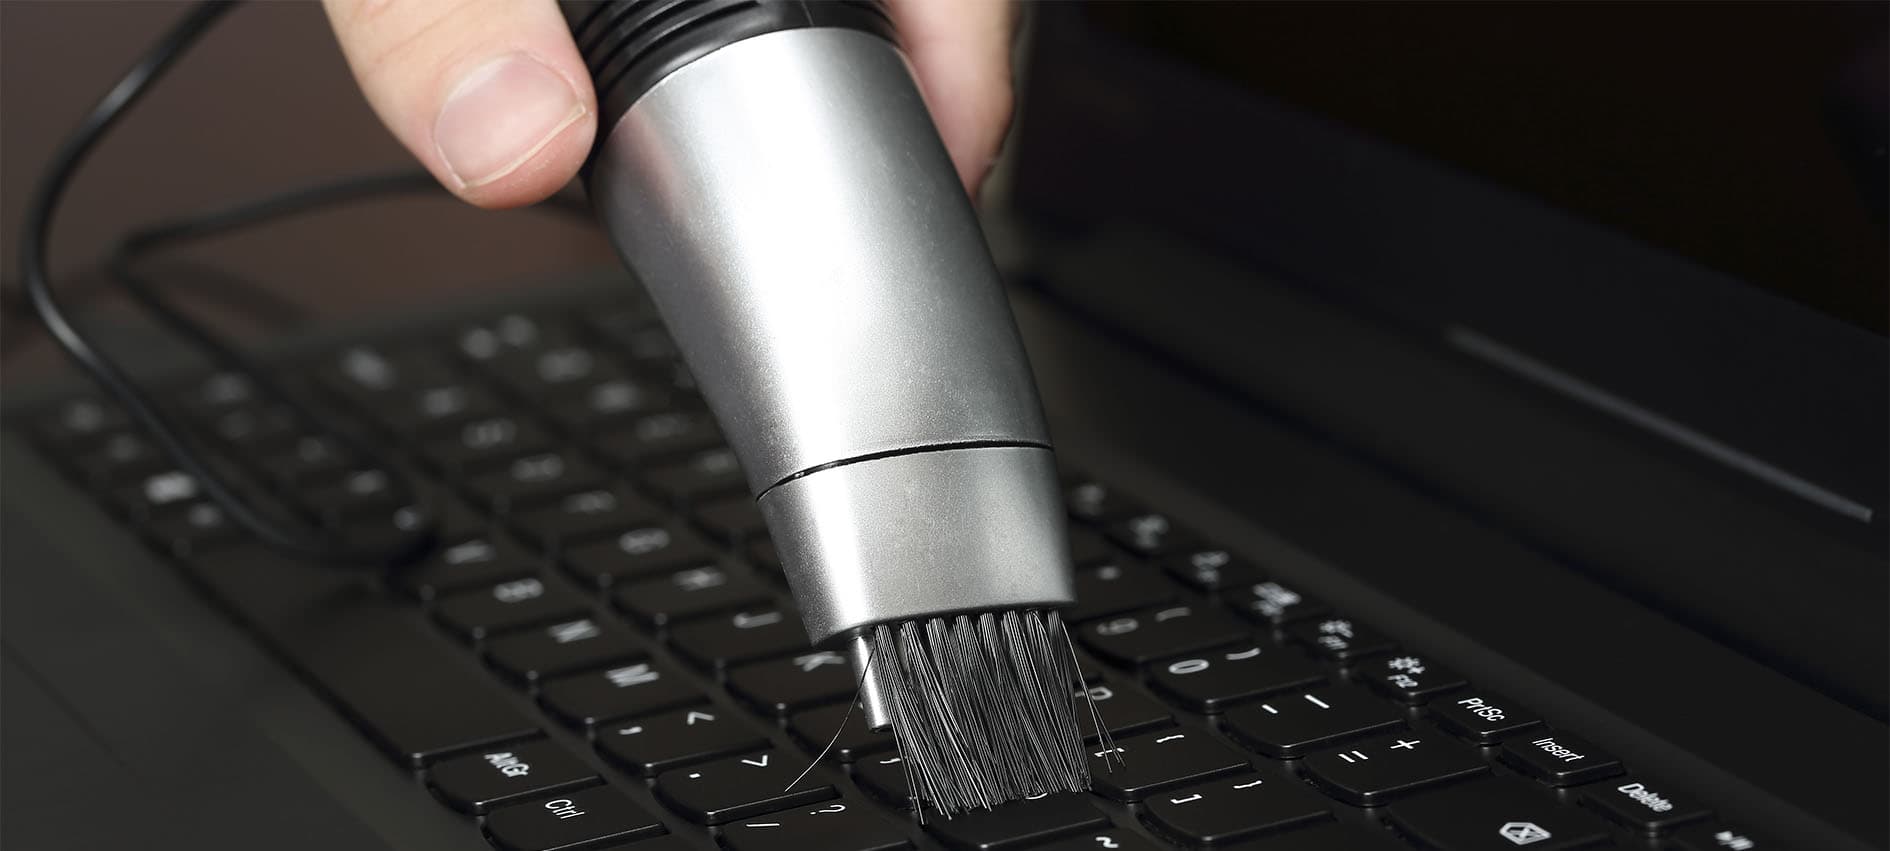 How To Clean A Gaming Laptop Keyboard